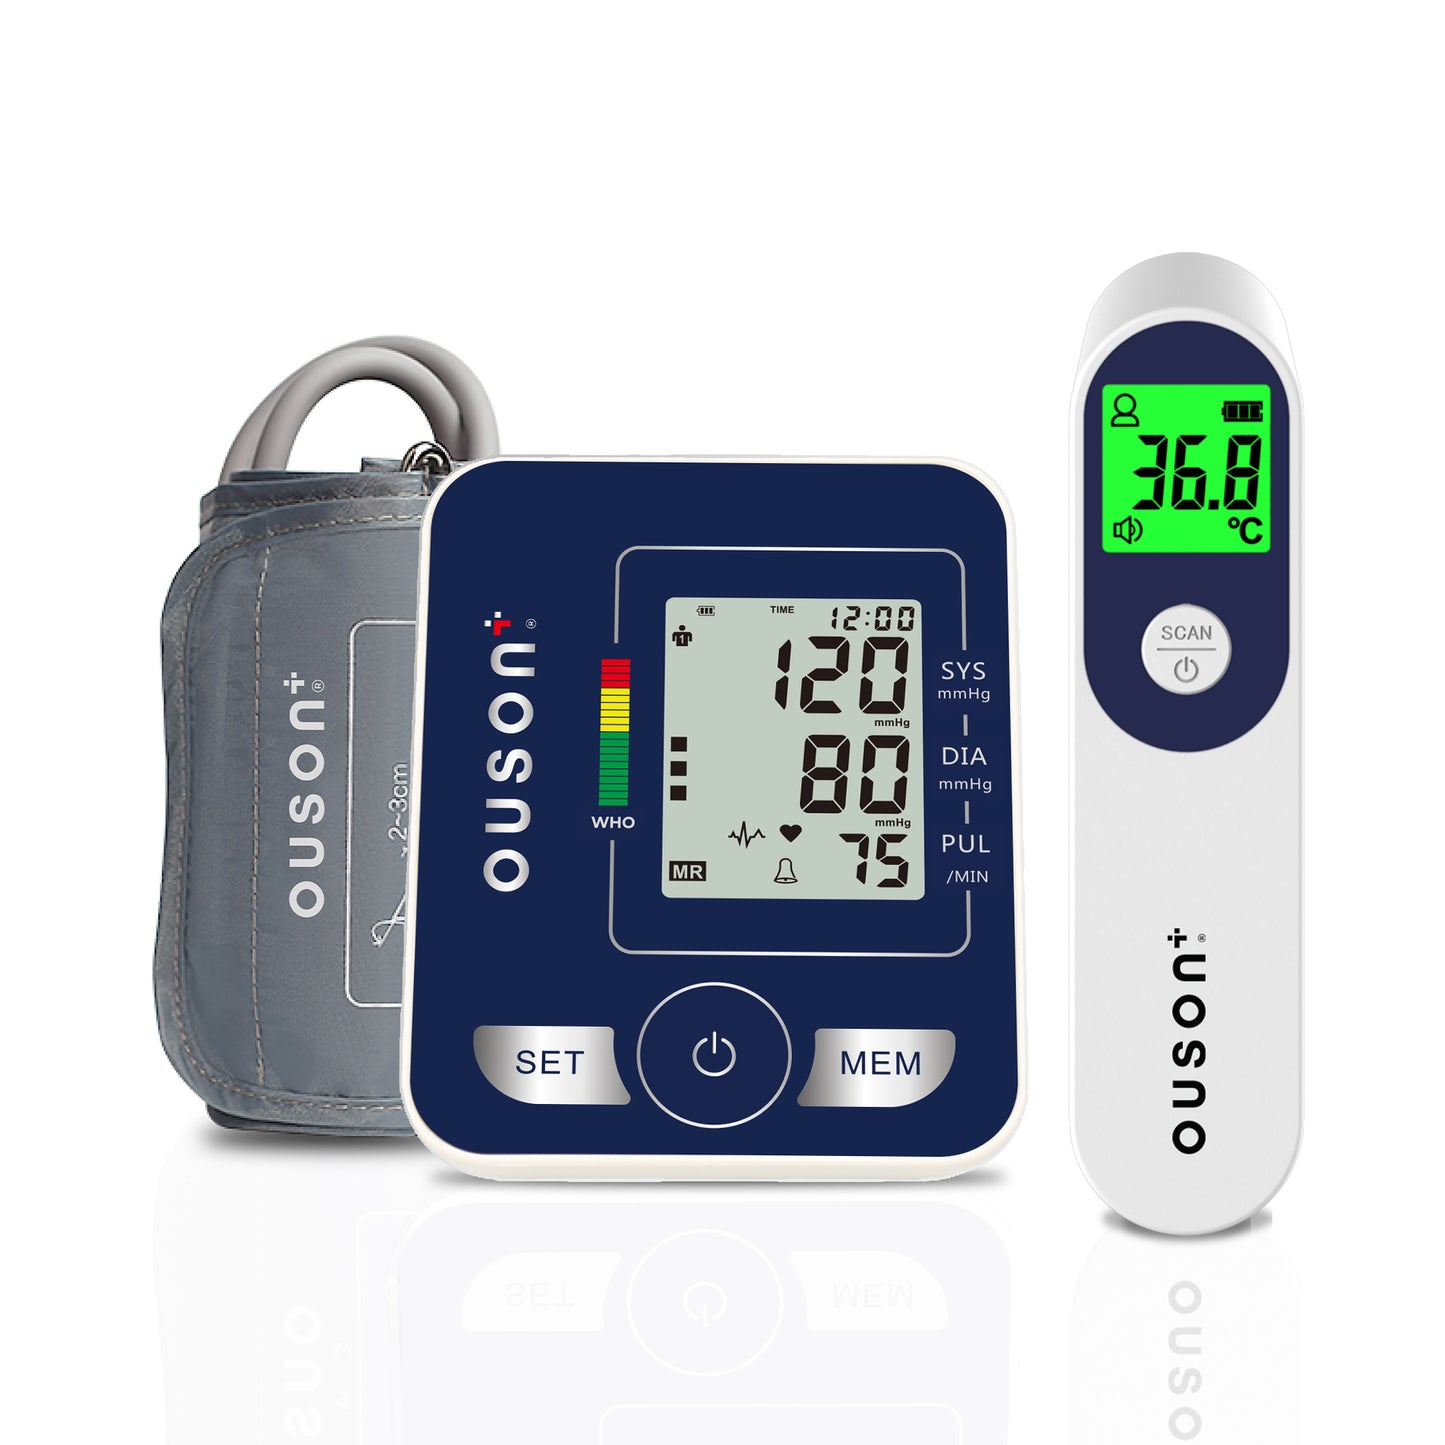 Ouson BSX556 Arm Type Blood Pressure Monitor & Infrared Thermometer Bundle